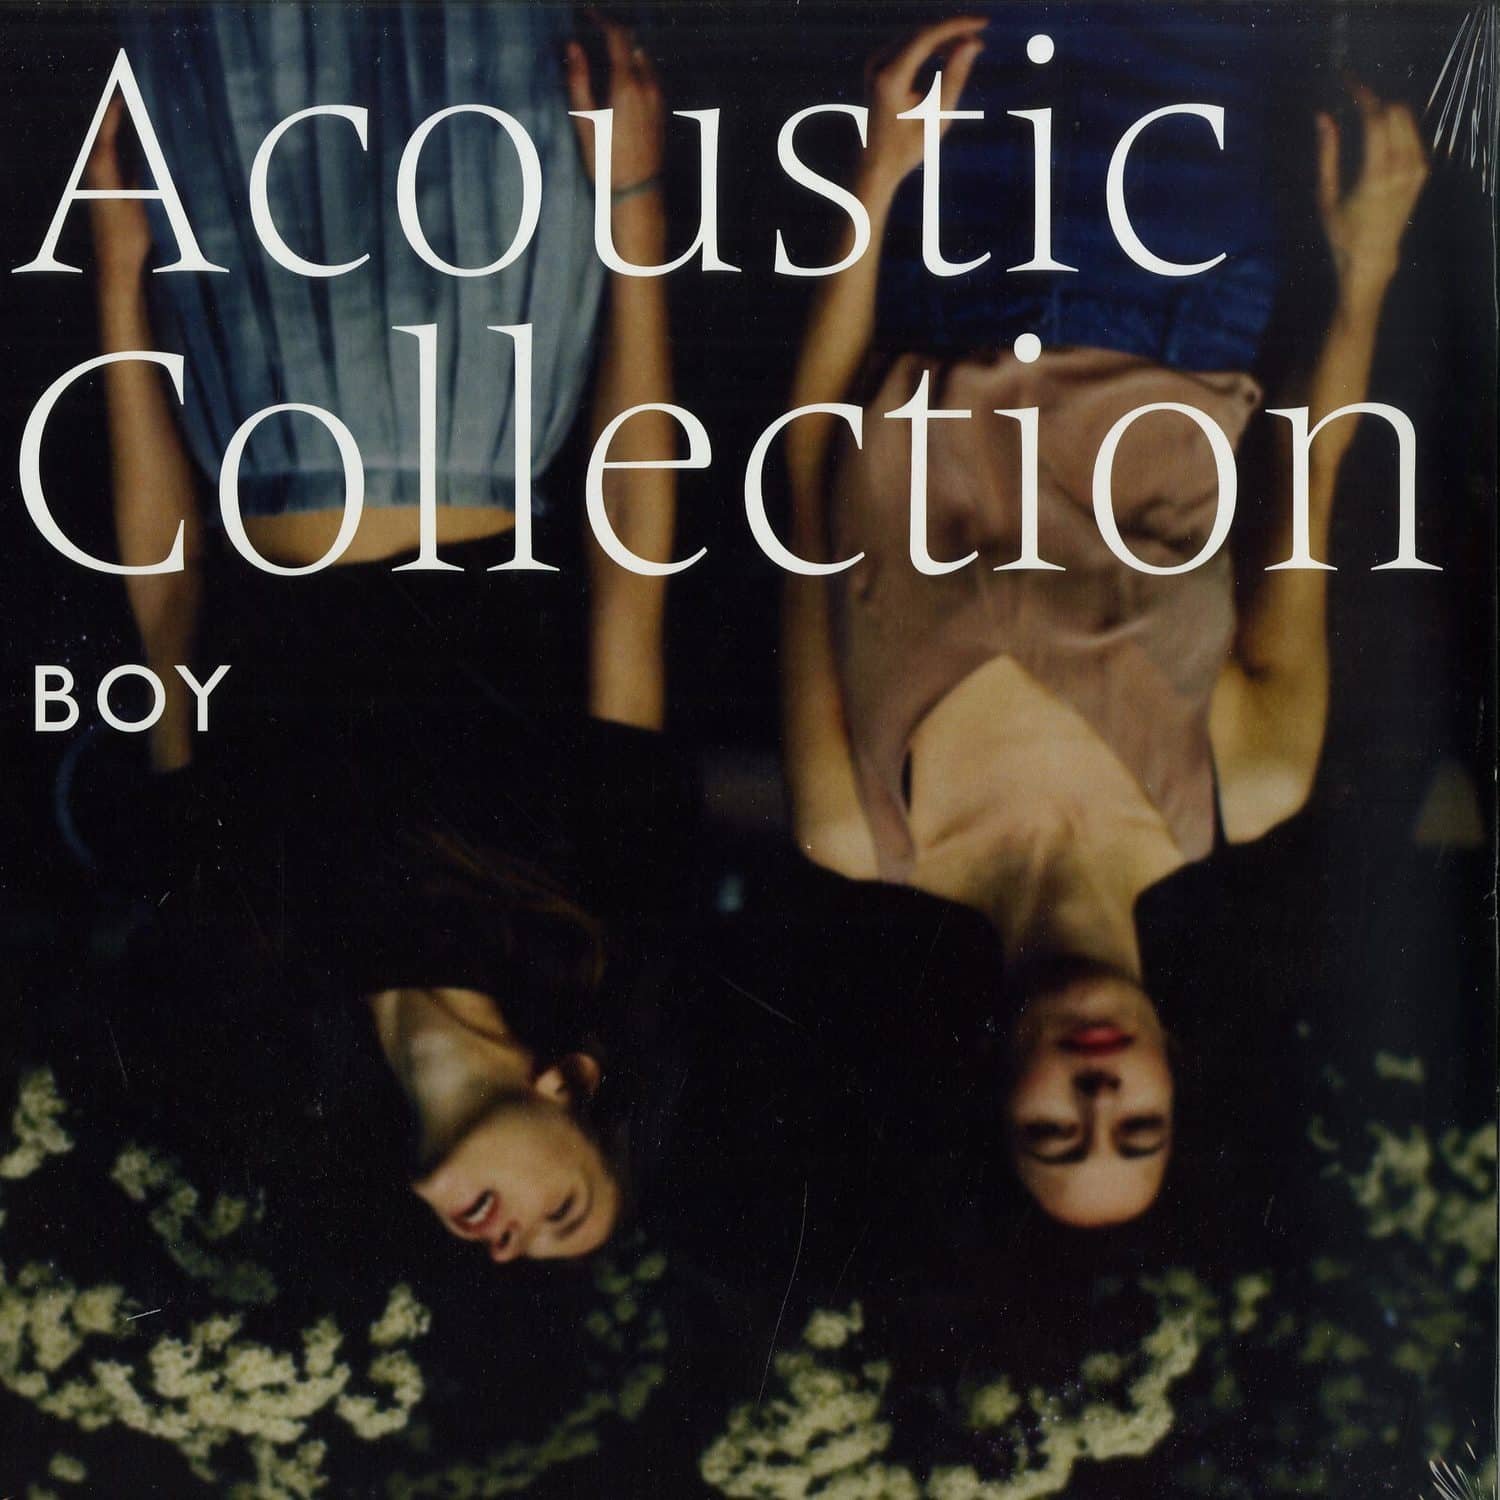 Boy - ACOUSTIC COLLECTION 